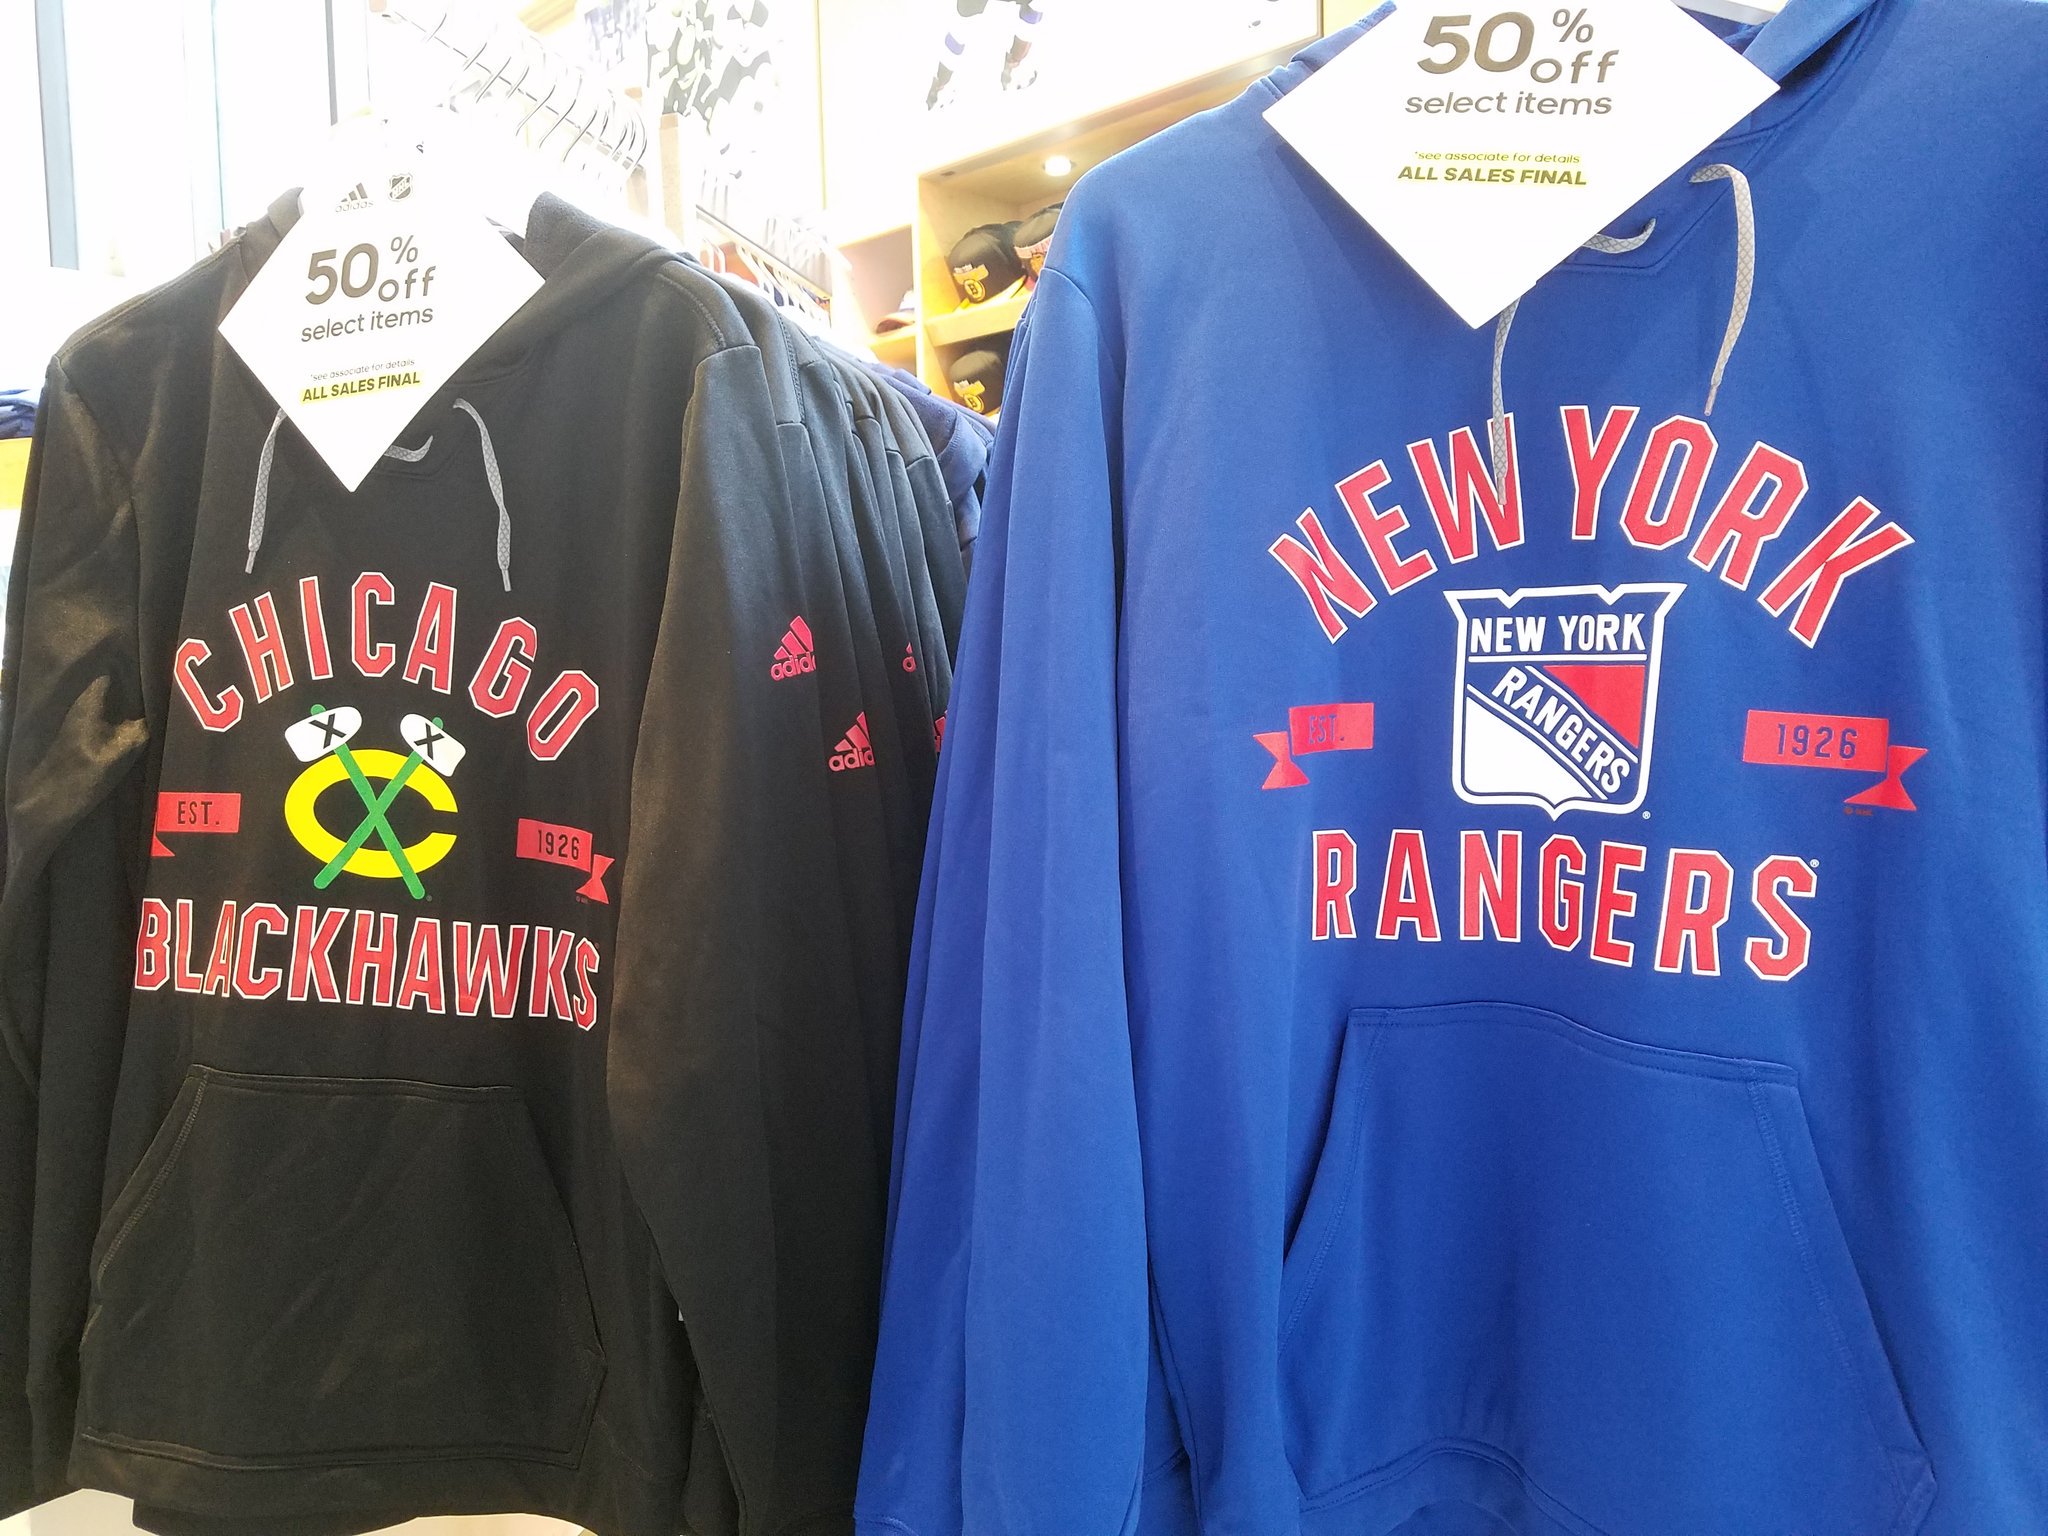 NHL Store in NYC restocked their letters/numbers. Get 'em while